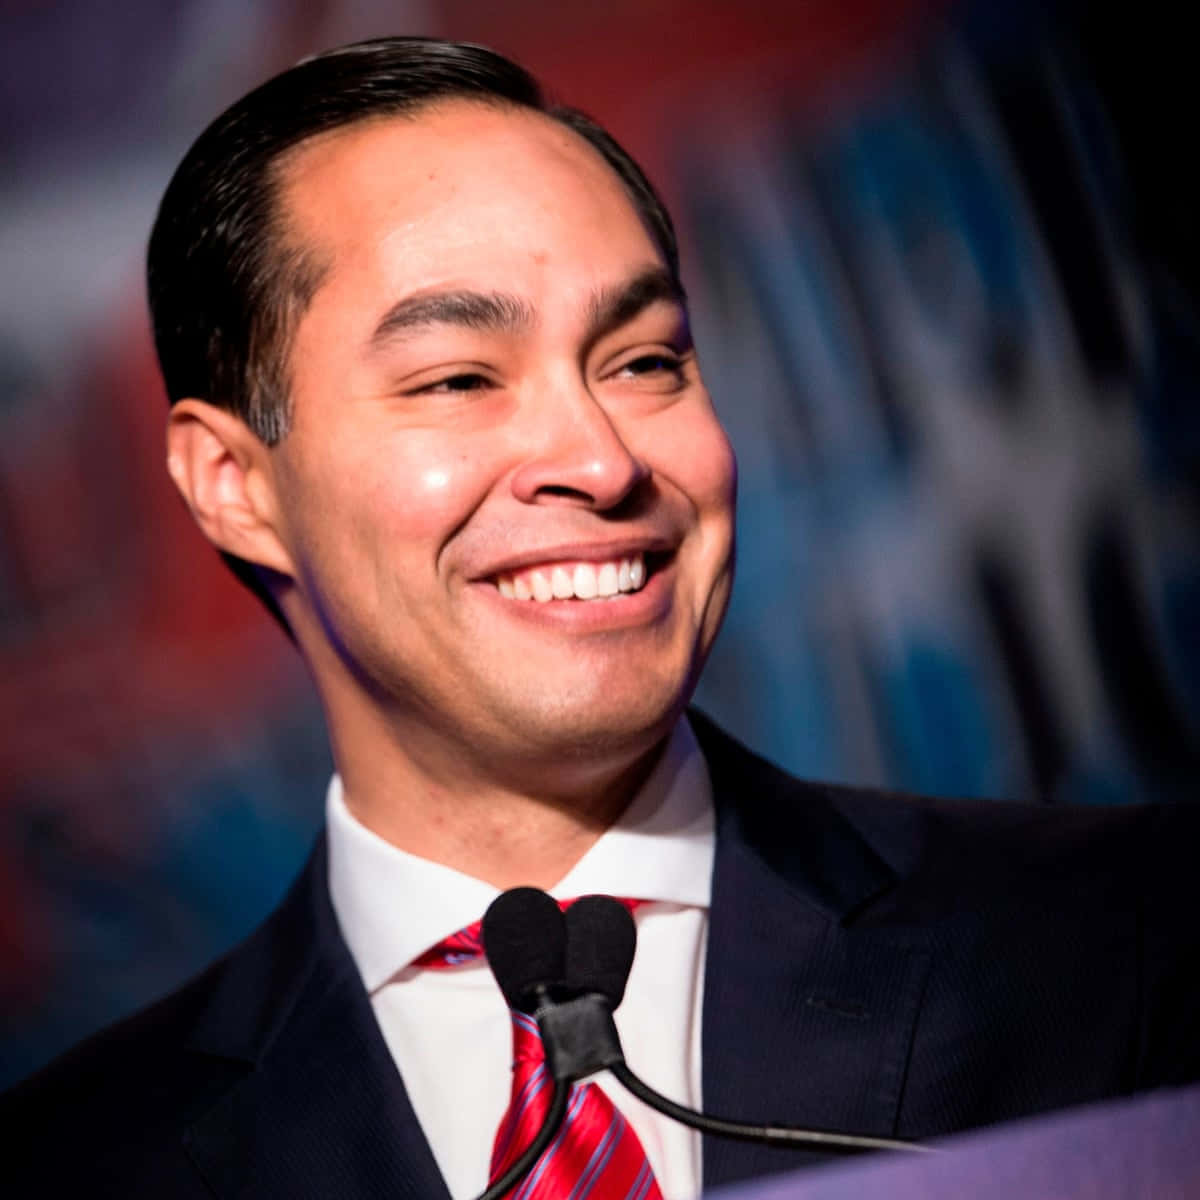 Julian Castro Smiling Widely With Teeth Wallpaper